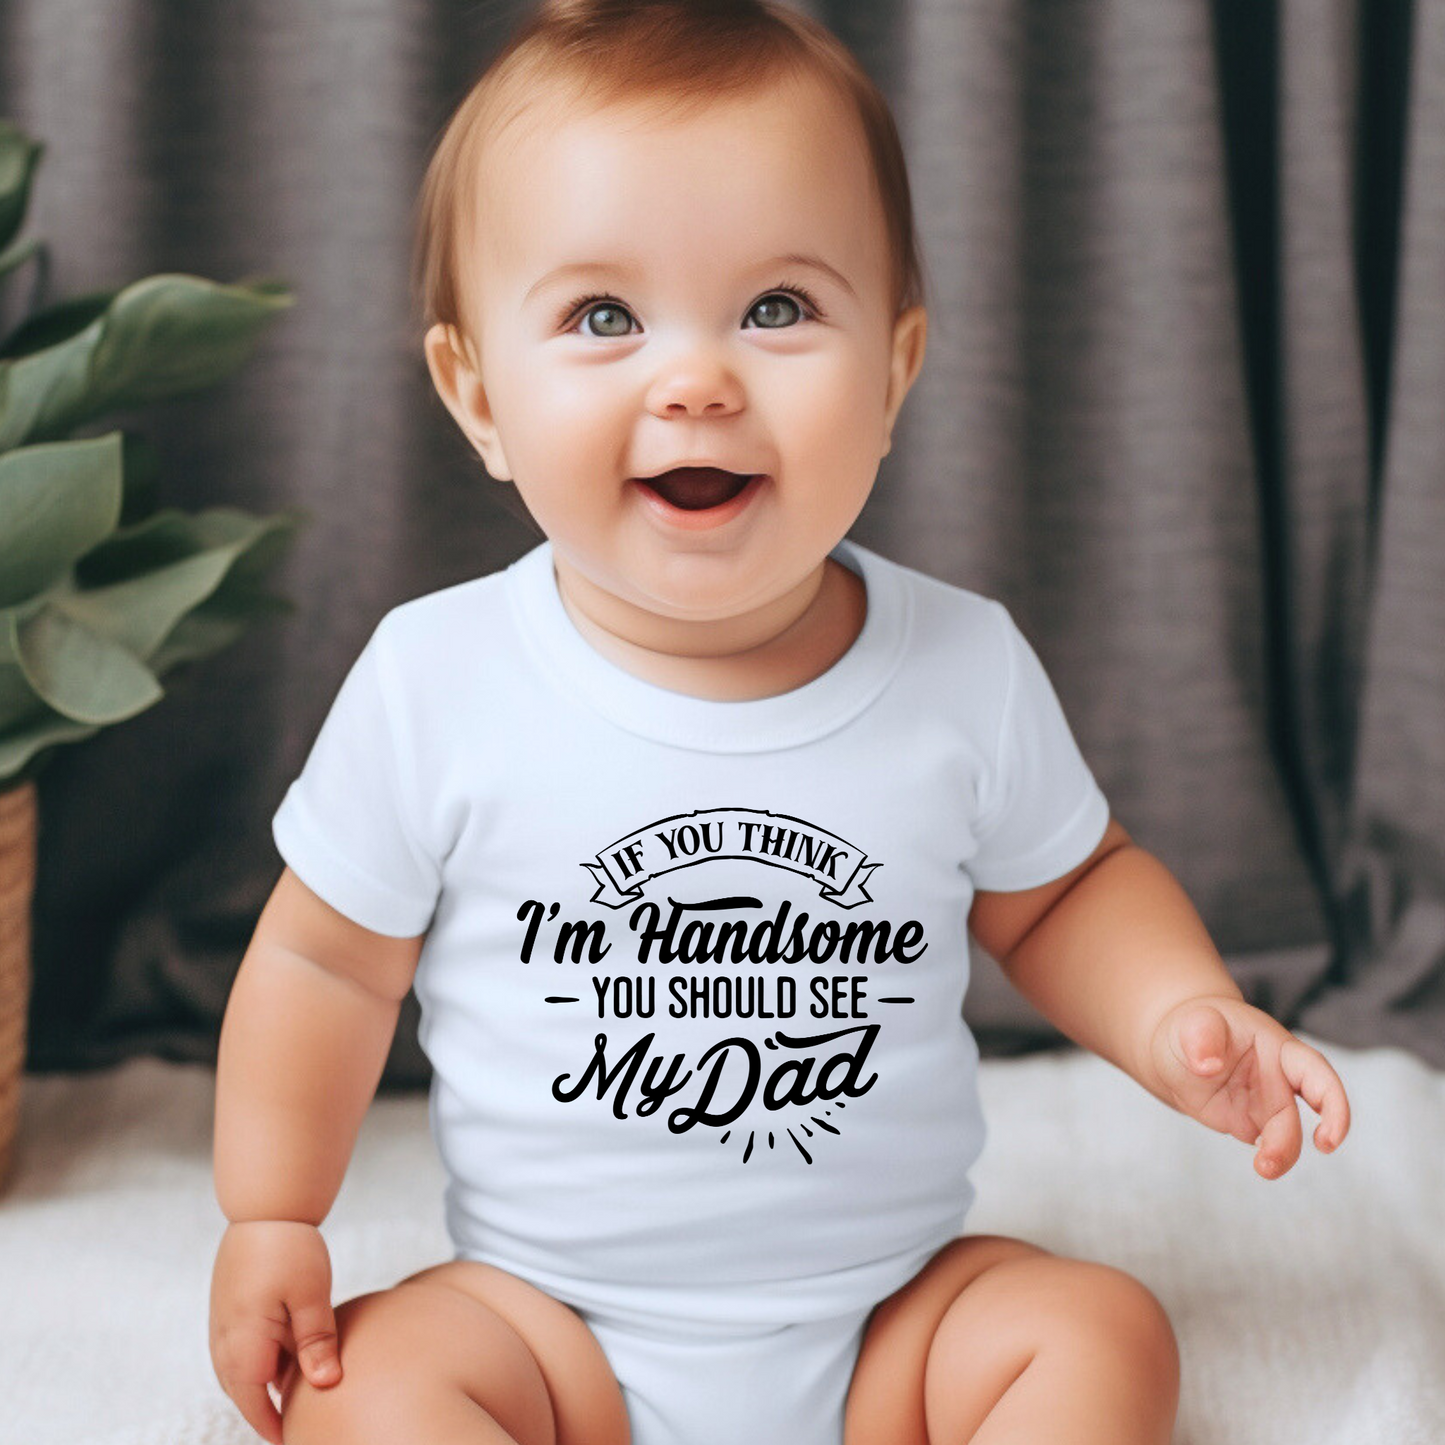 Handsome Dad, Handsome Baby - Father and Son Shirts